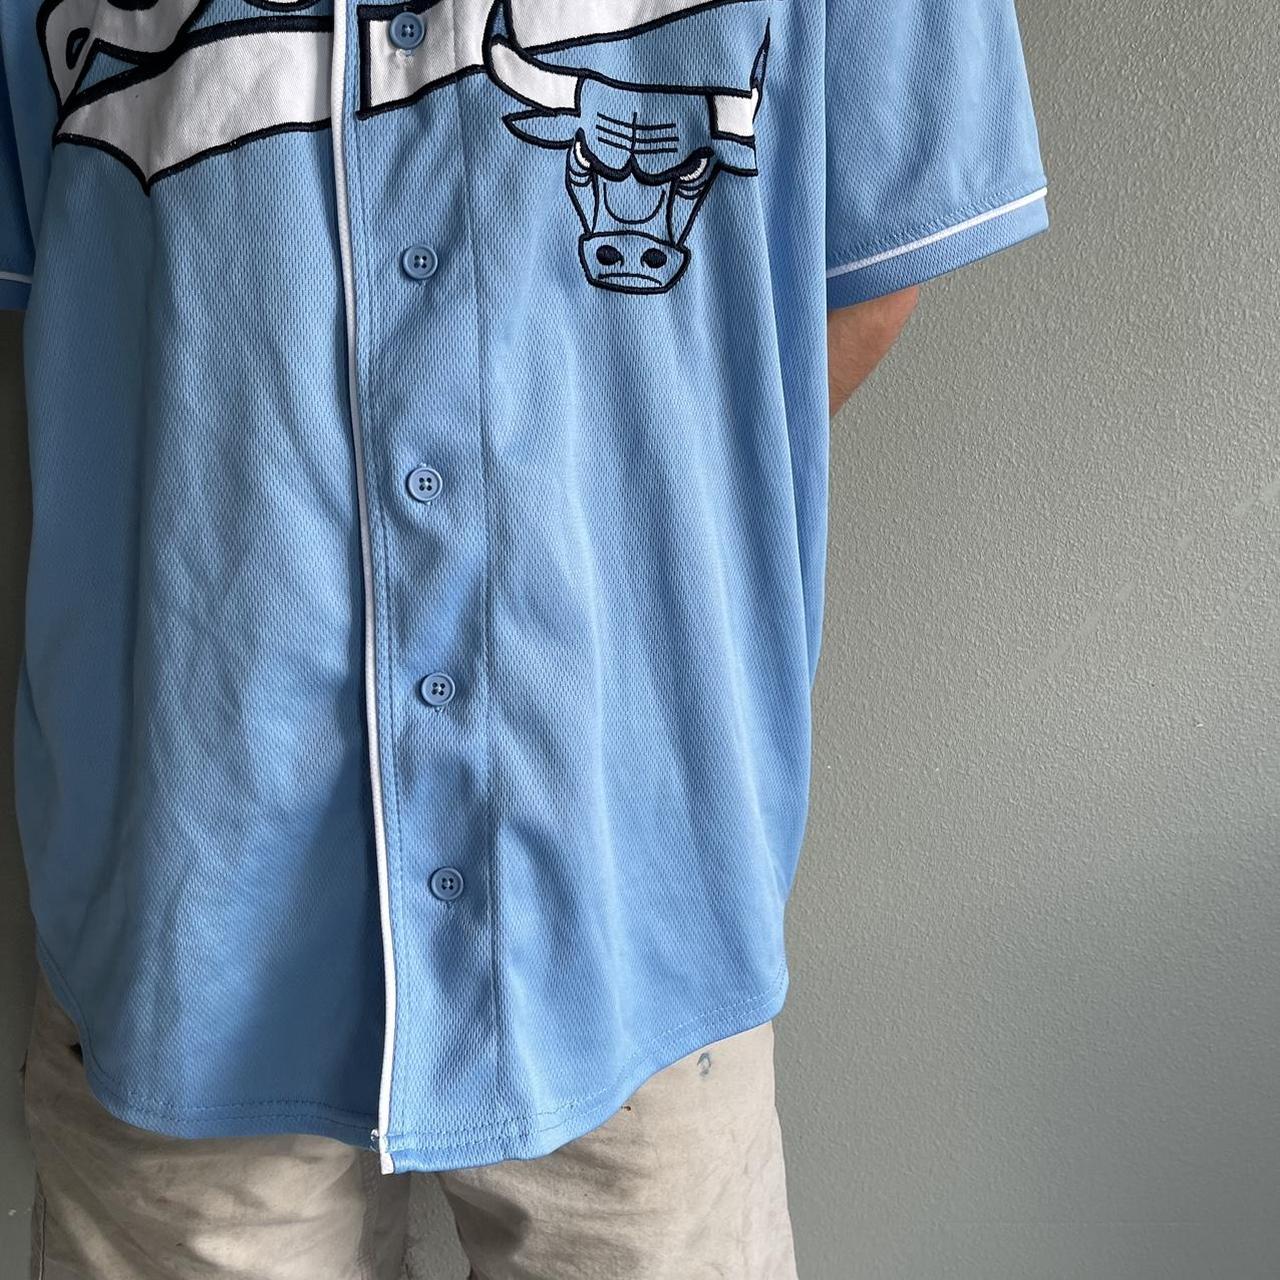 Pinstripe Chicago Bulls jersey Could fit M/L - Depop